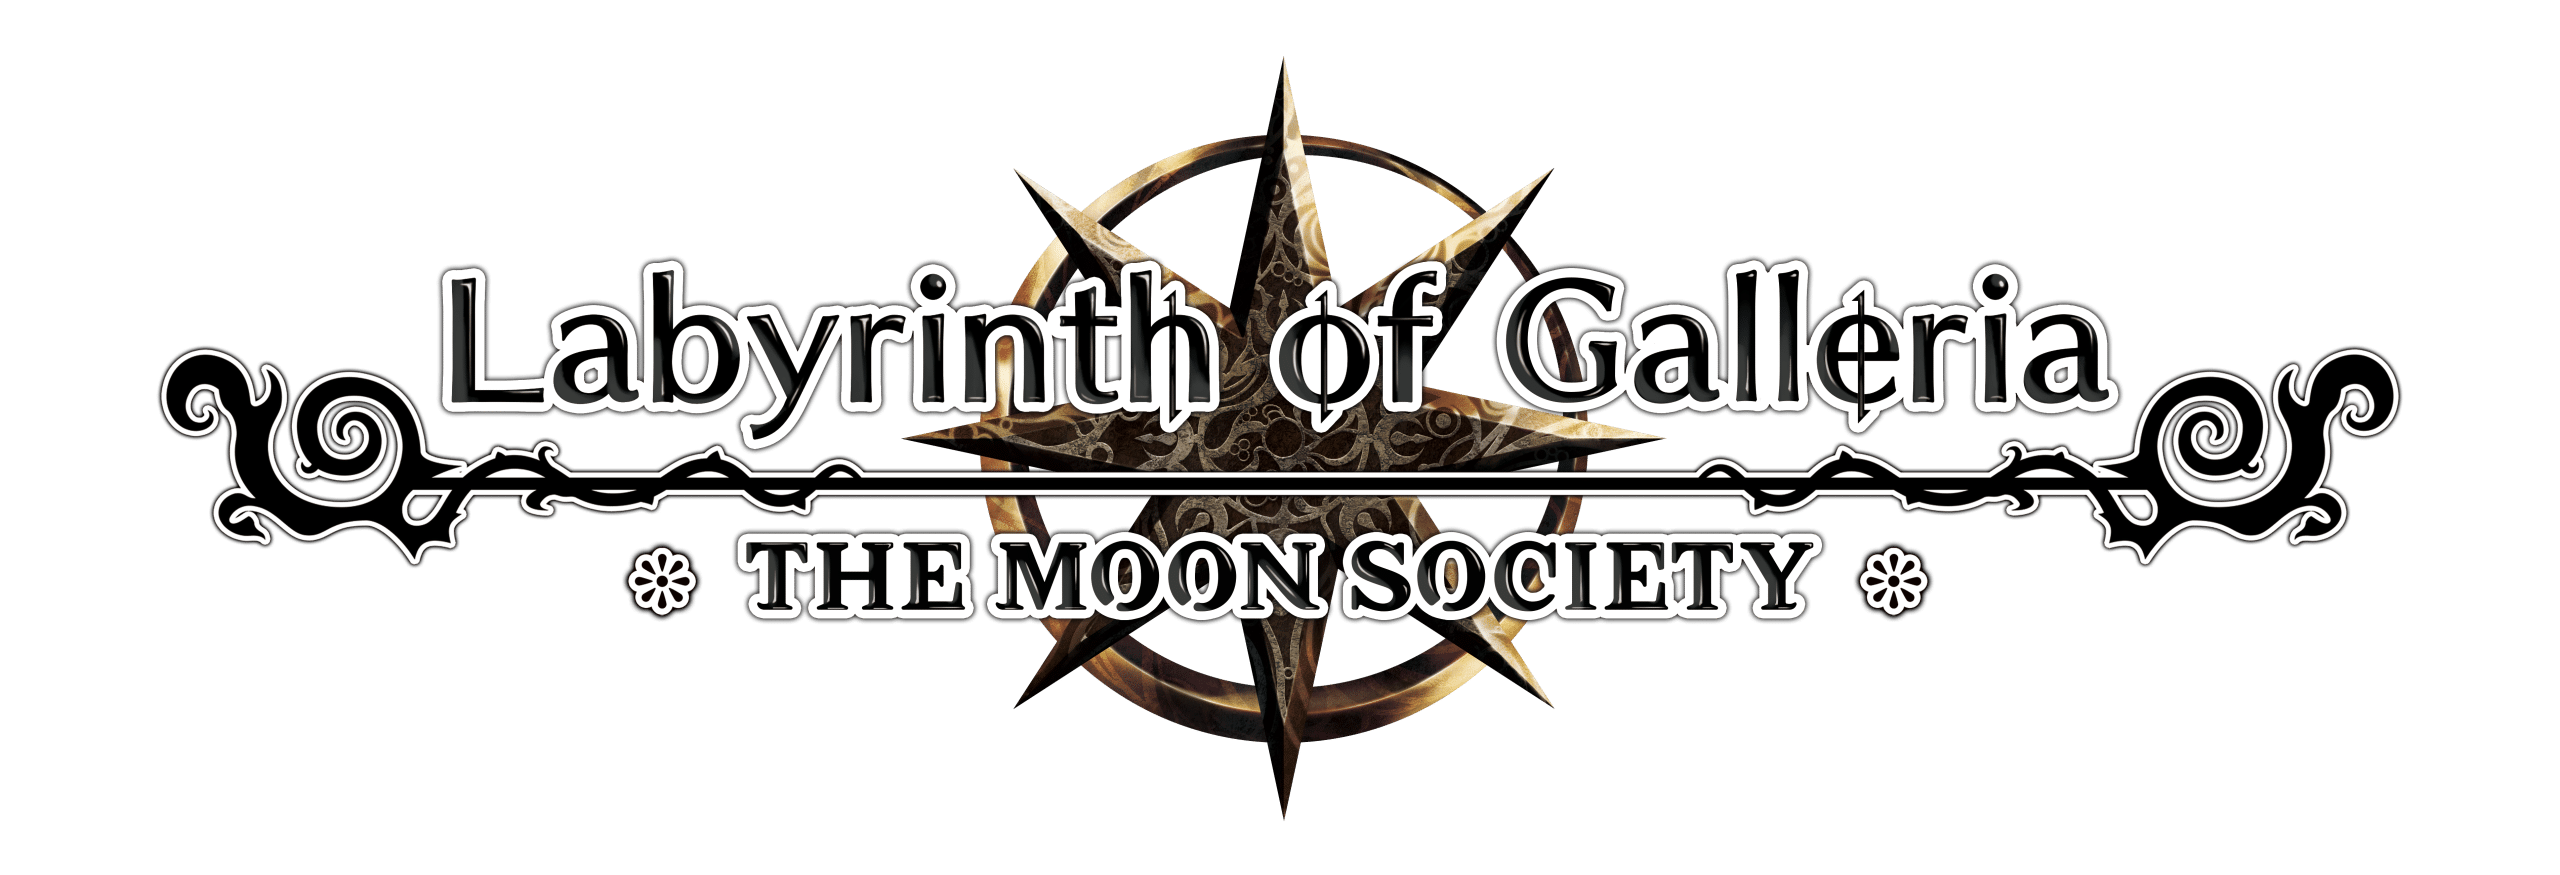 LABYRINTH OF GALLERIA: THE MOON SOCIETY ANNONCÉ !